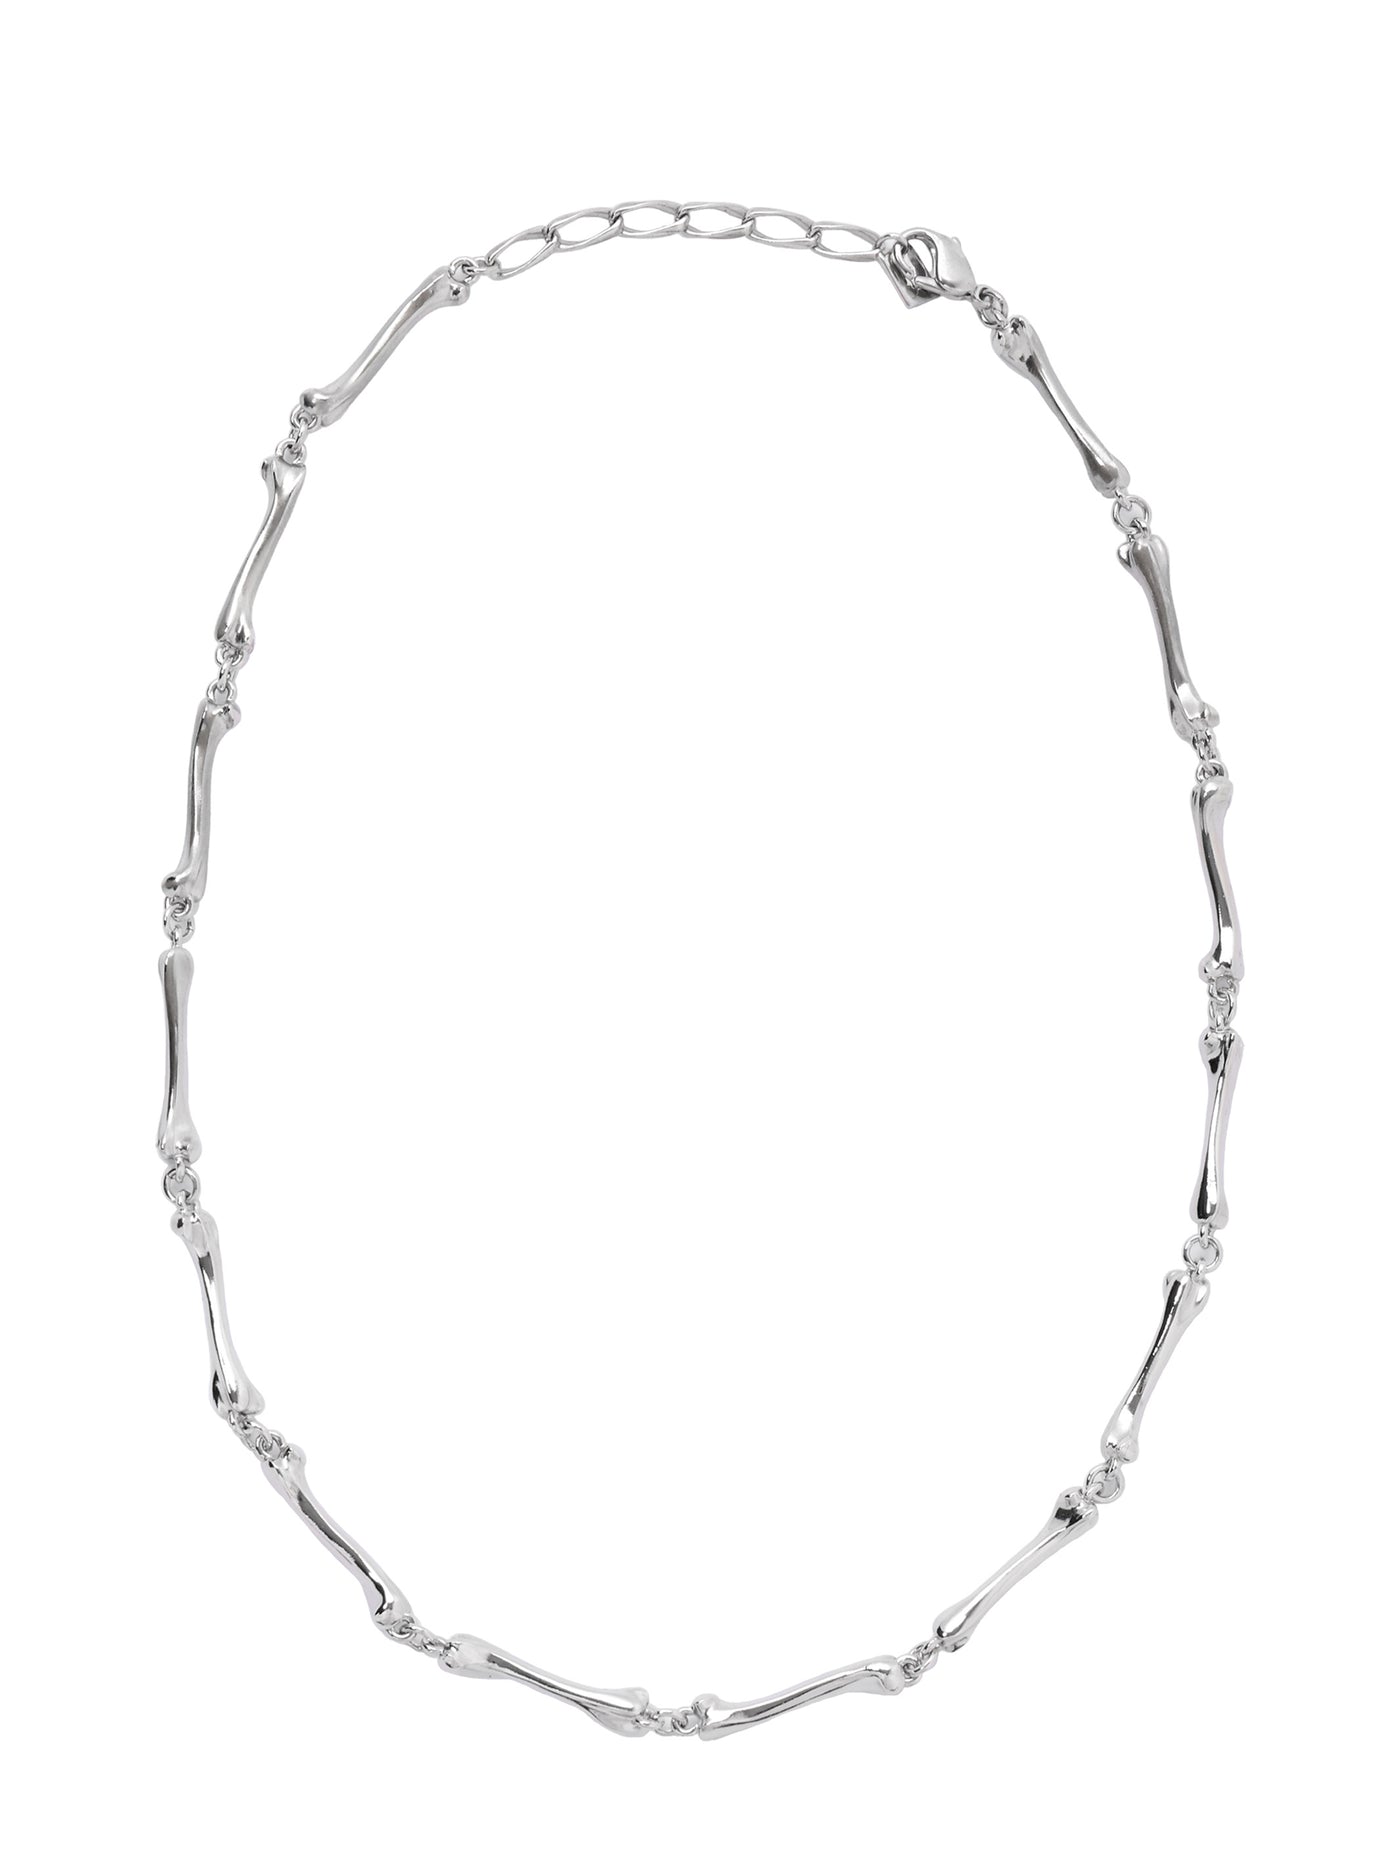 Bone connected short necklace silver925